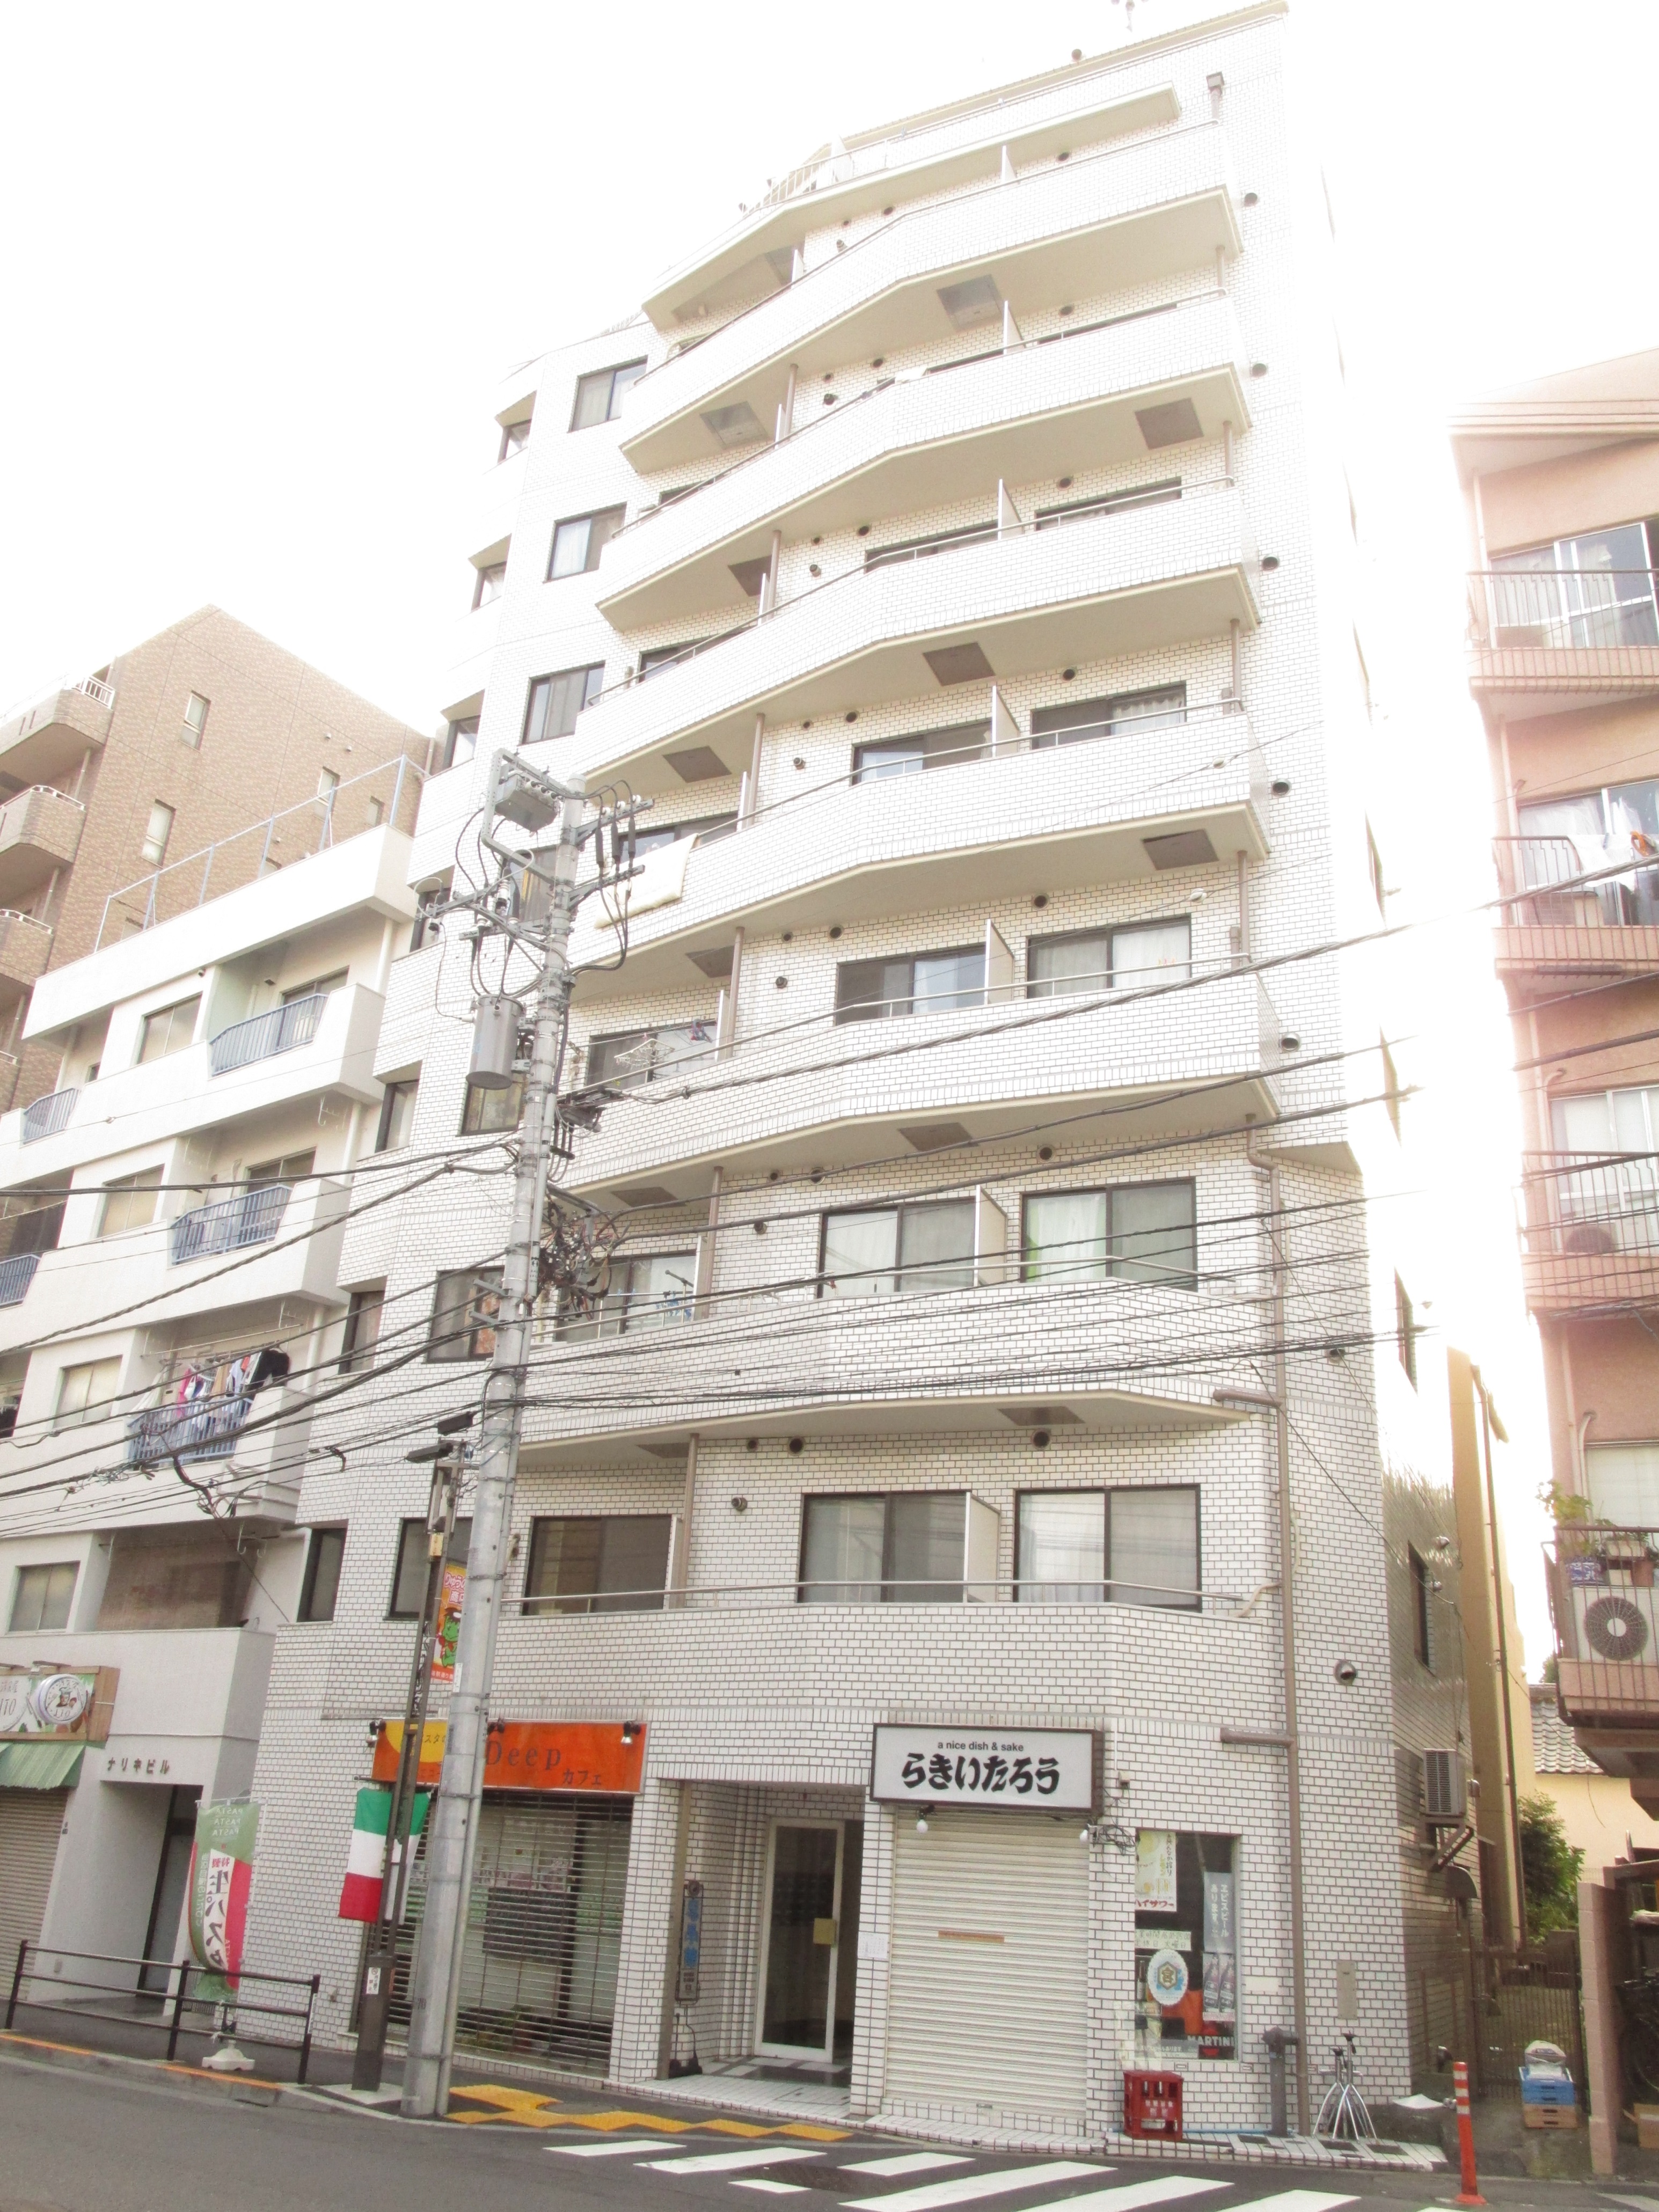 Tohto Monthly Friendly Heights<br>4 minutes walk to Tabata Station on the Yamanote Line!